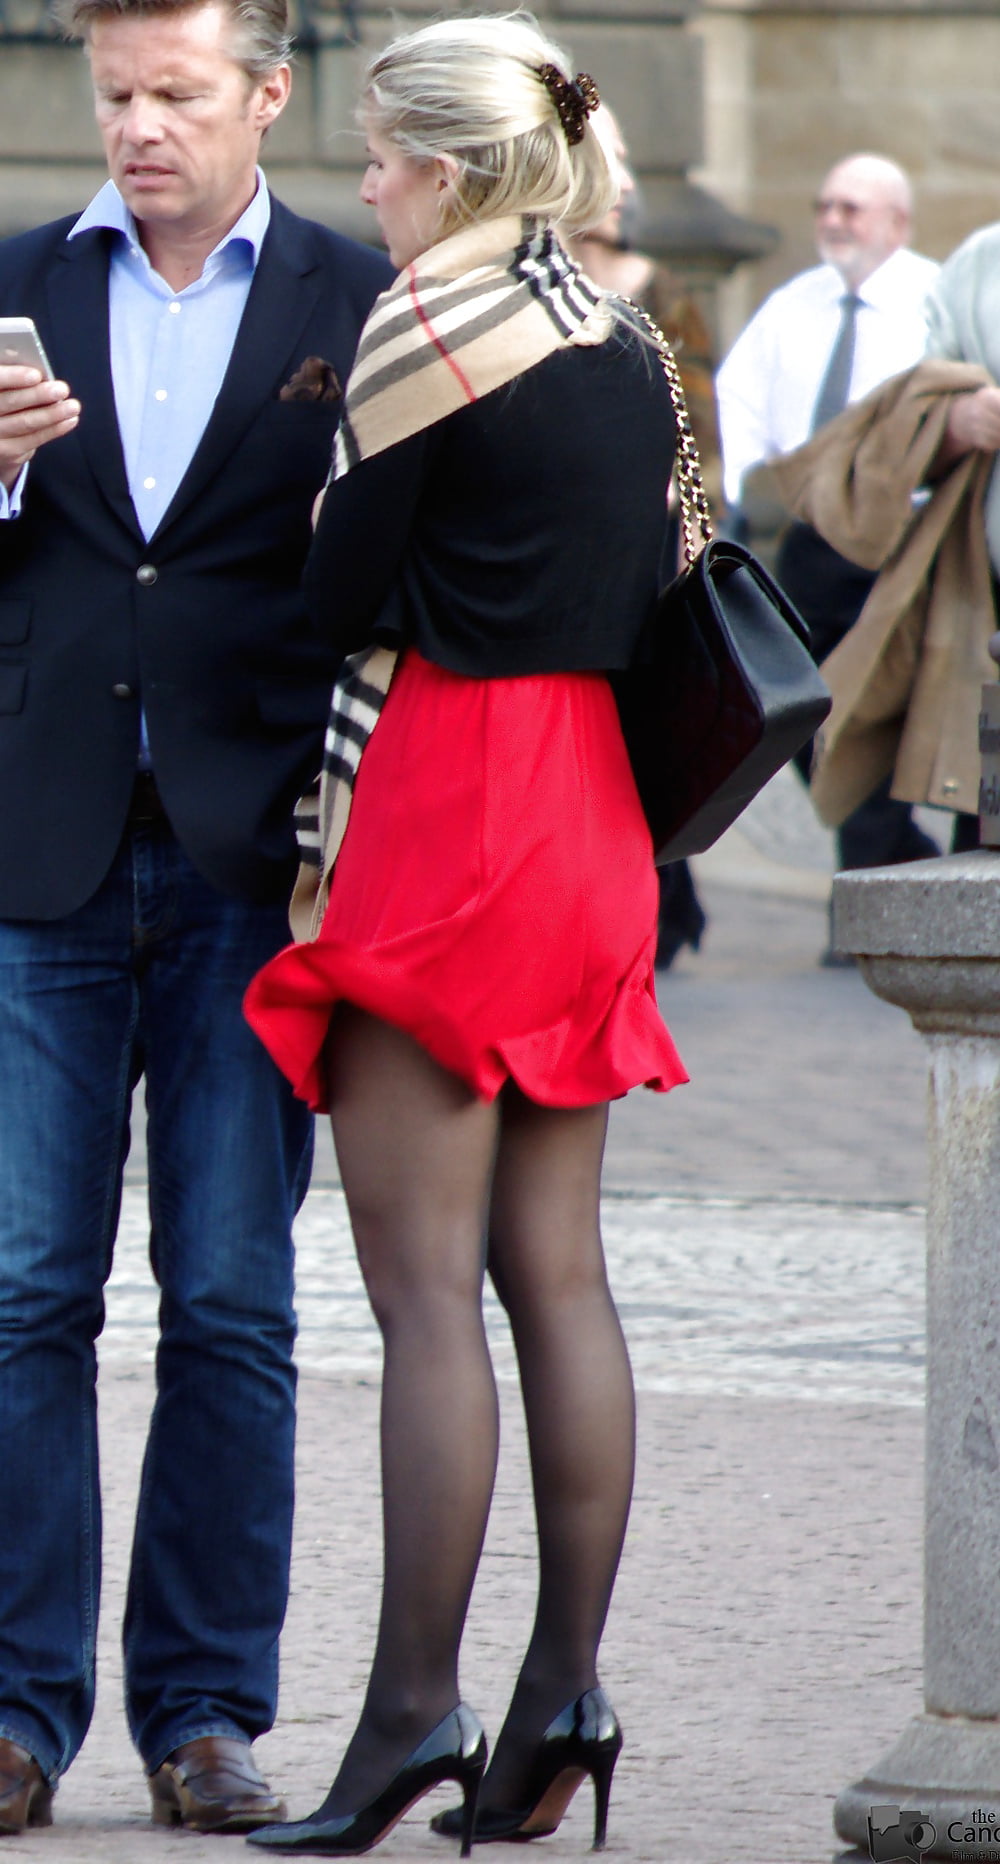 Candid Street Pantyhose -Tights #013 porn pictures